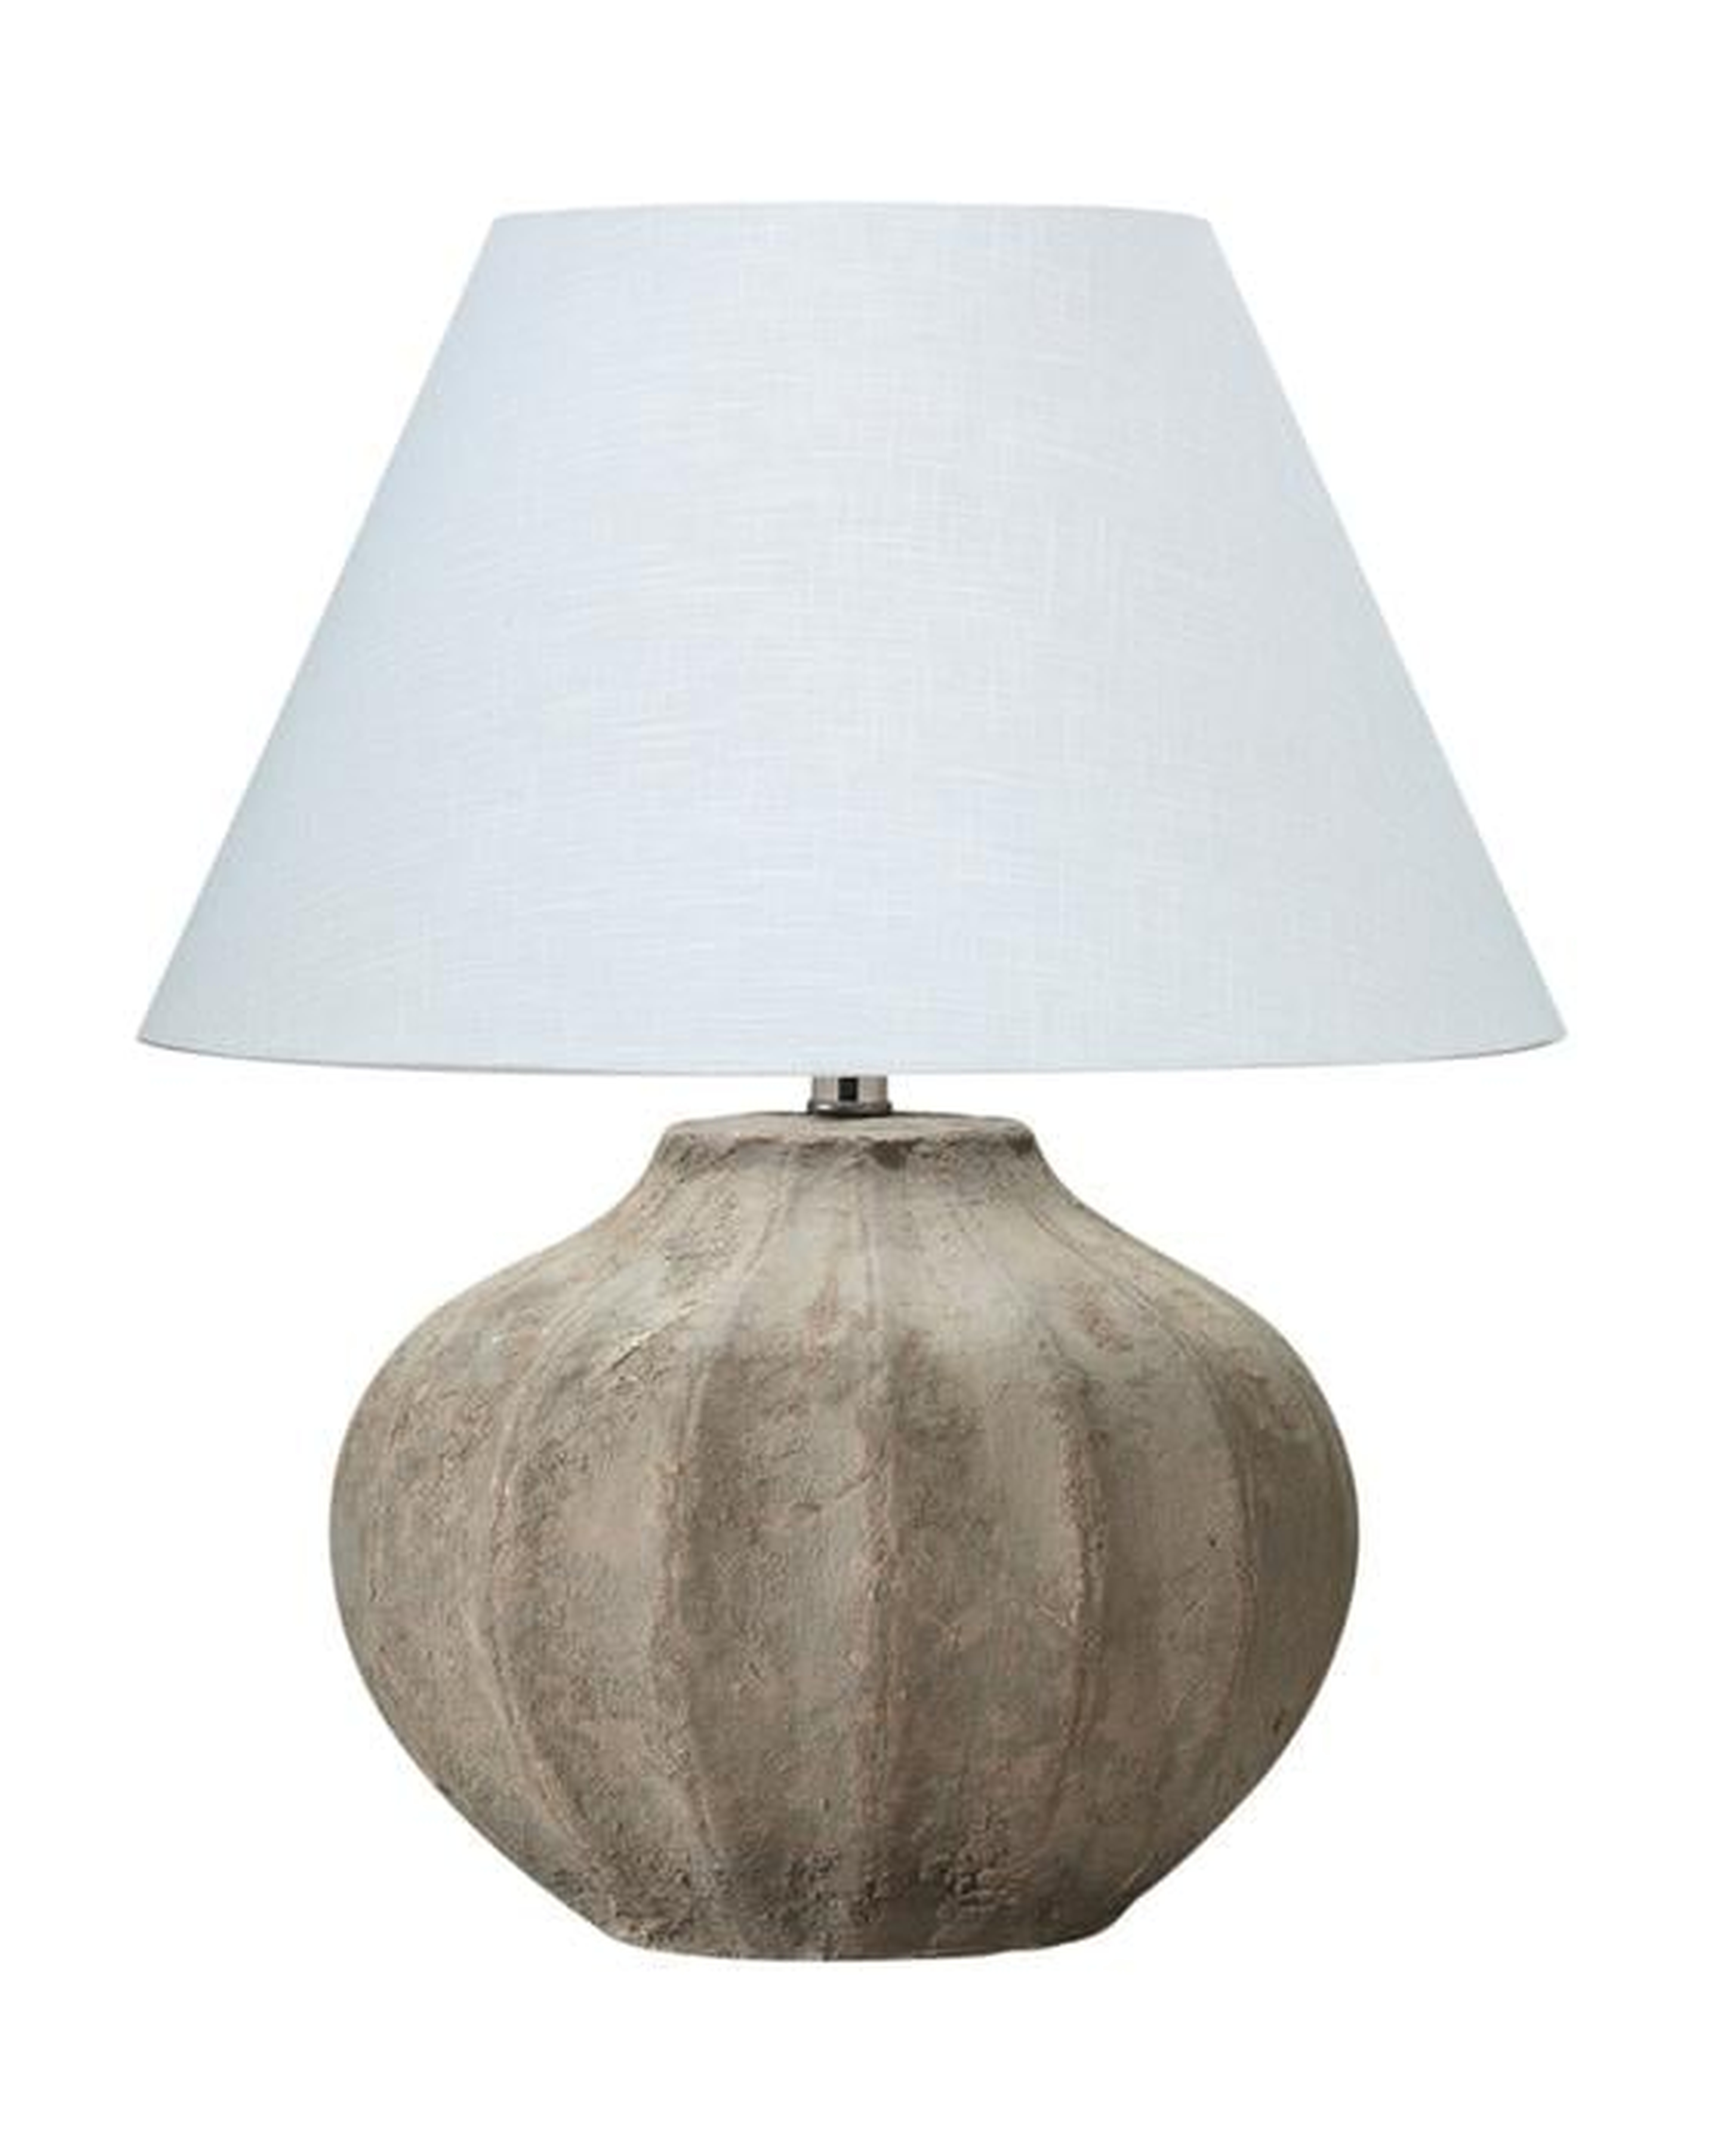 Clamshell Table Lamp - McGee & Co.